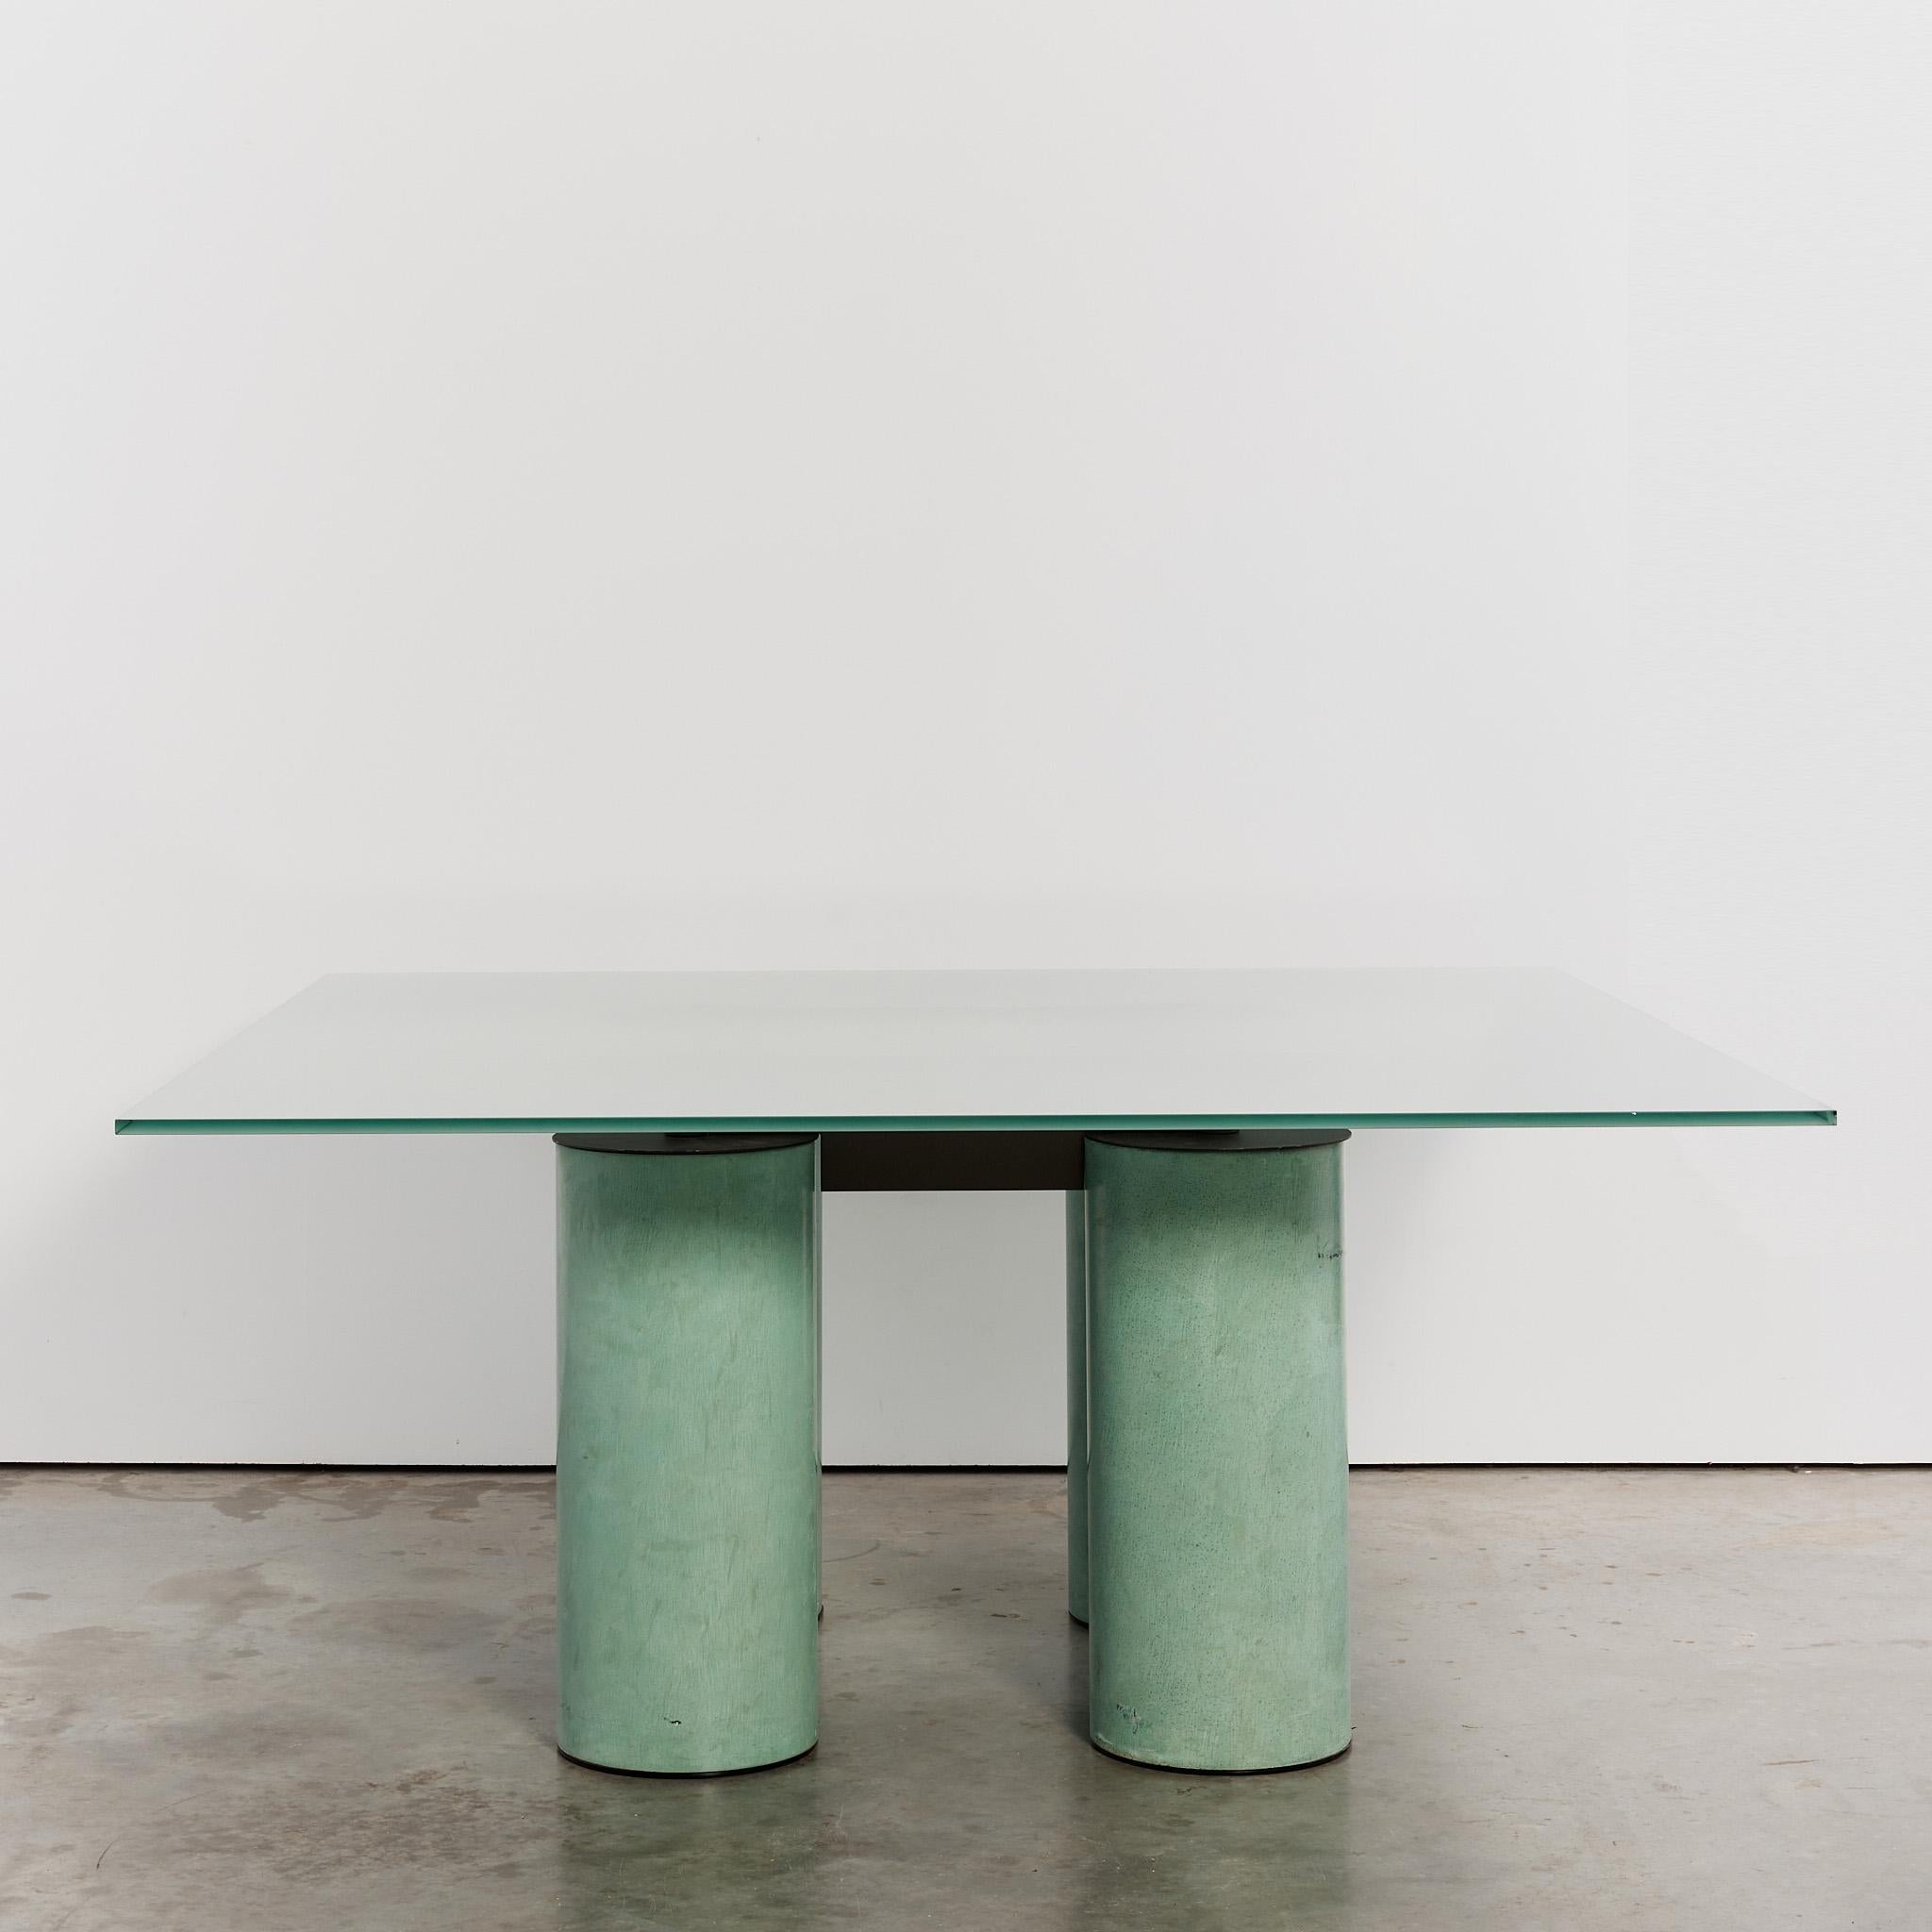 The Serenissimo square board room table by Massimo & Lella Vignelli for Acerbis. With its distinctive column legs and frosted glass top, this oversized version is suitable as a statement board room table or can have the glass replaced for a dining